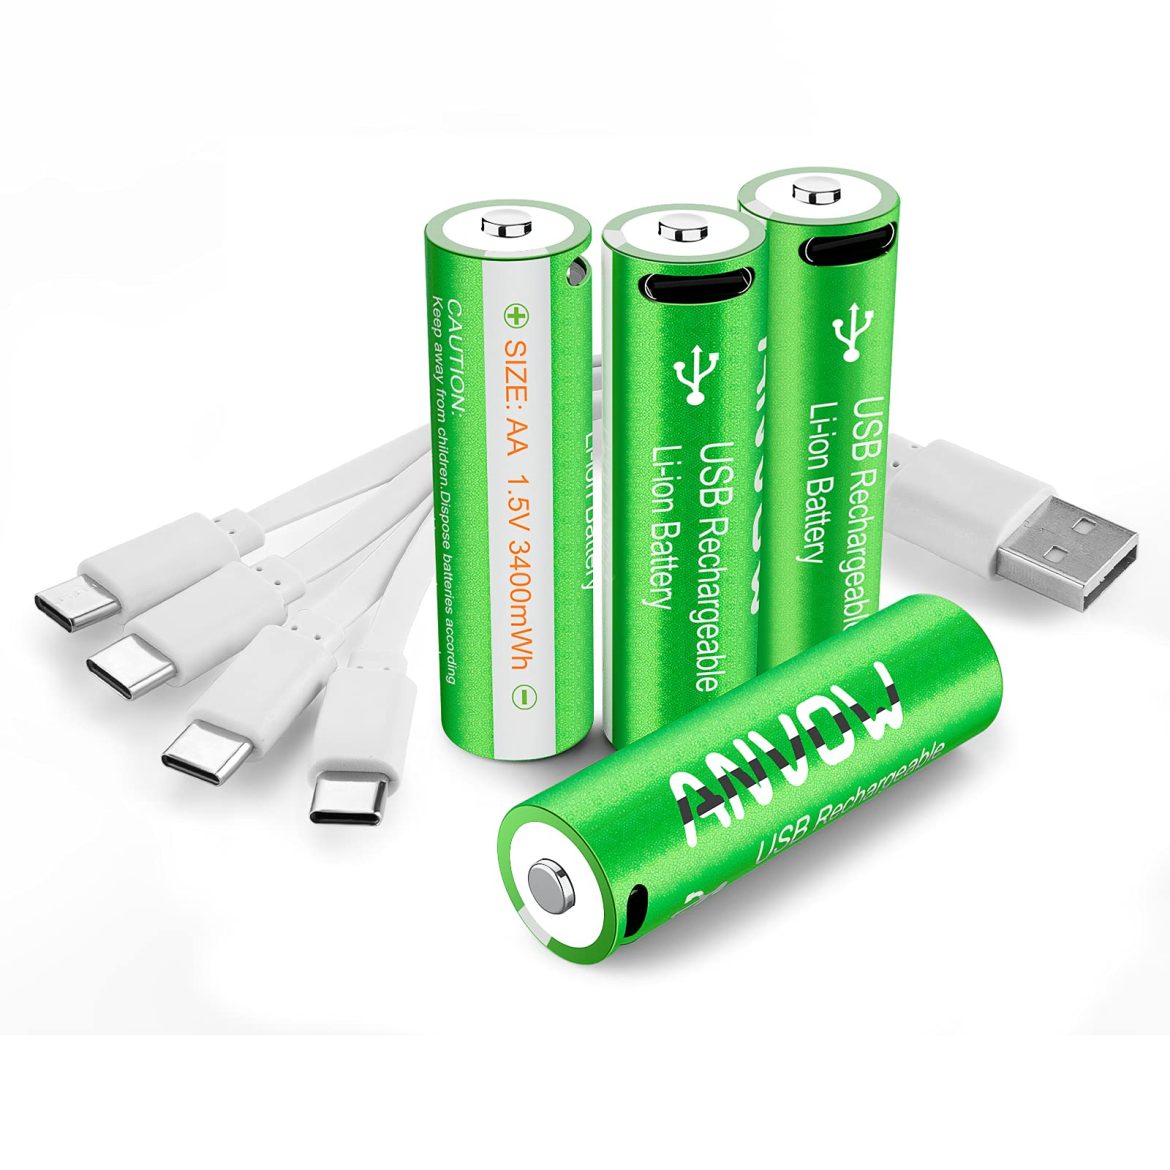 Why Buy a USB Rechargeable Battery?